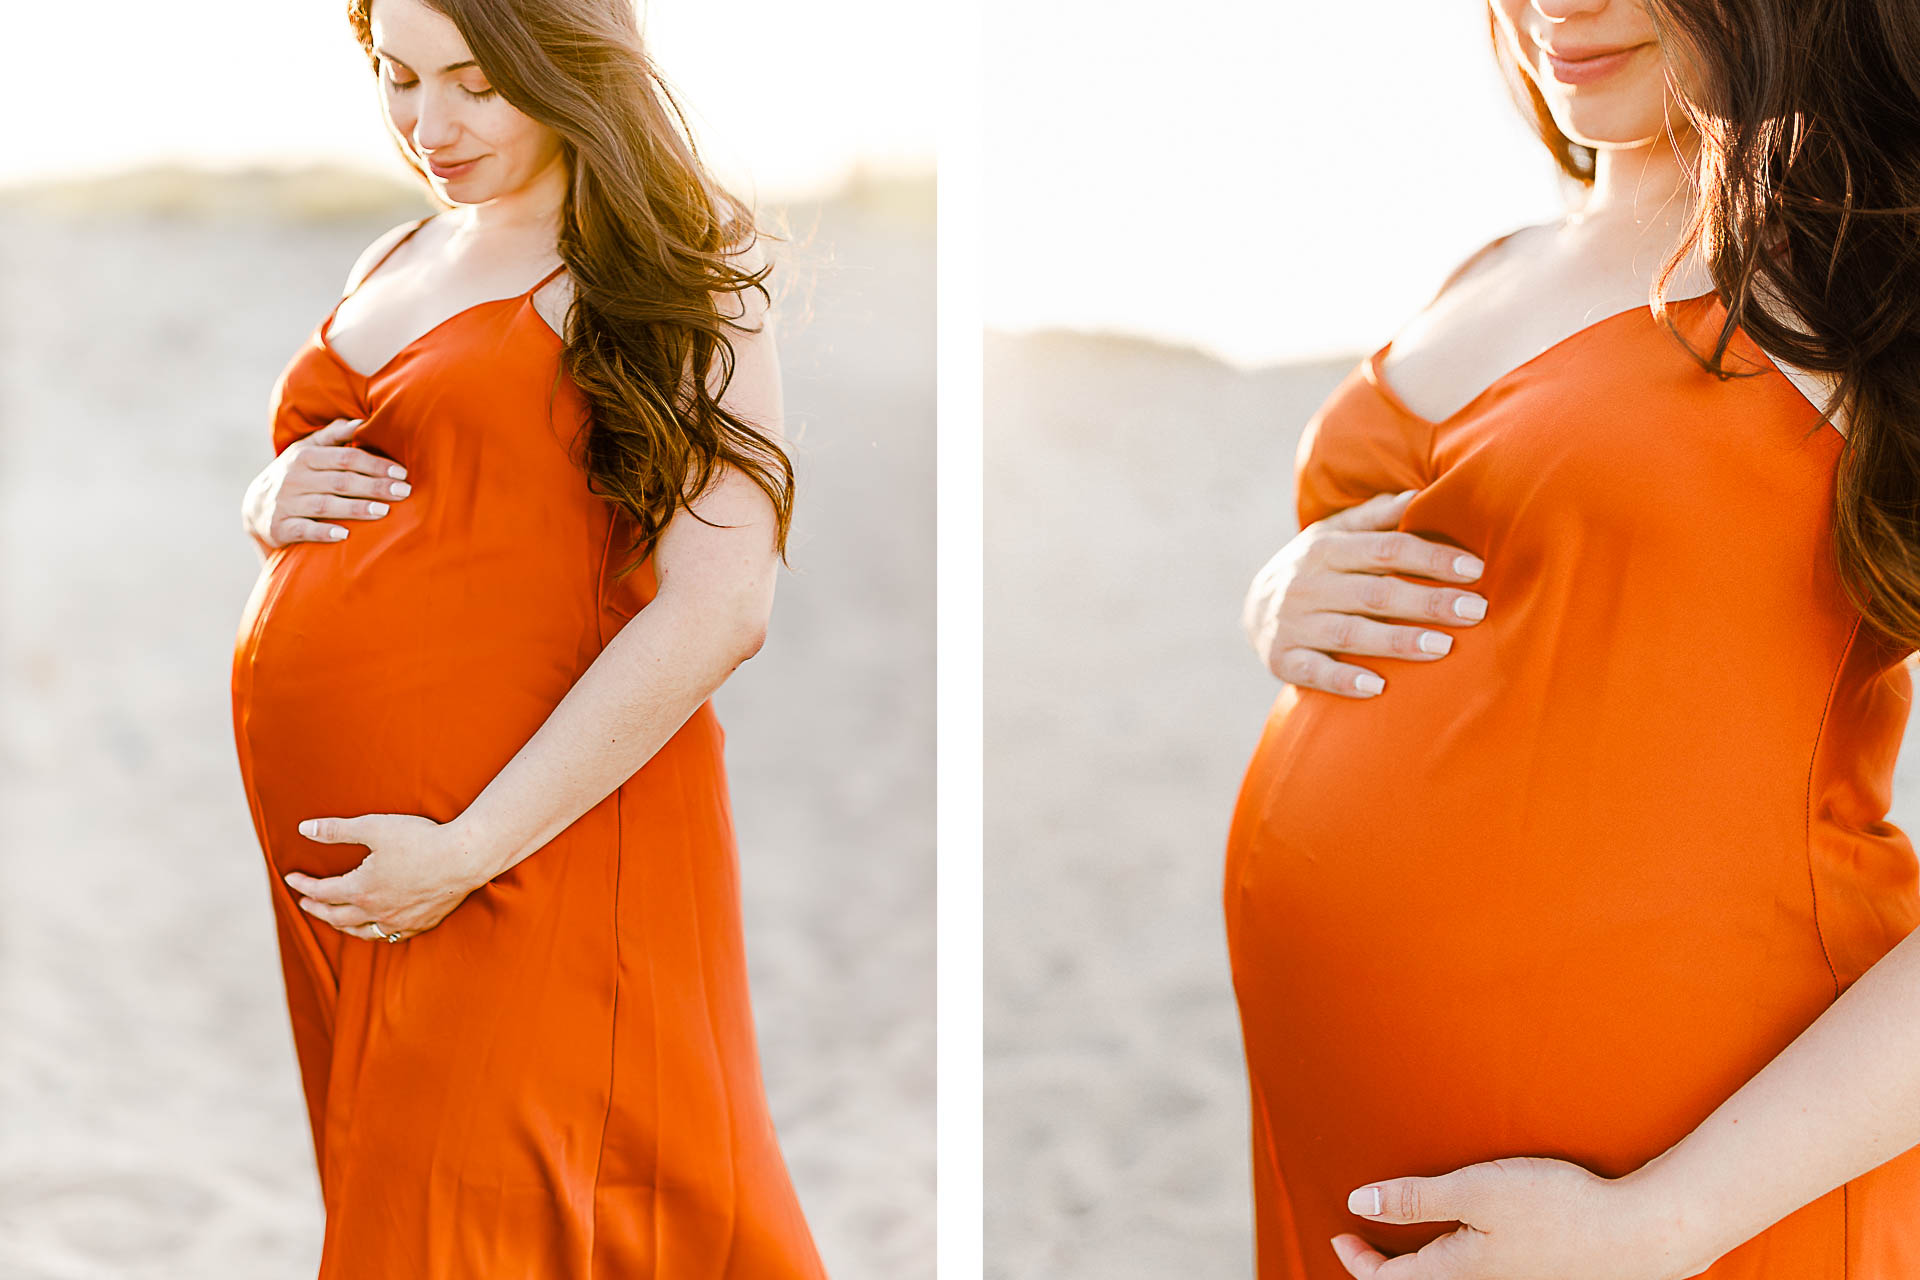 Photos by Norwell Maternity Photographer Christina Runnals | Maternity portraits on the beach